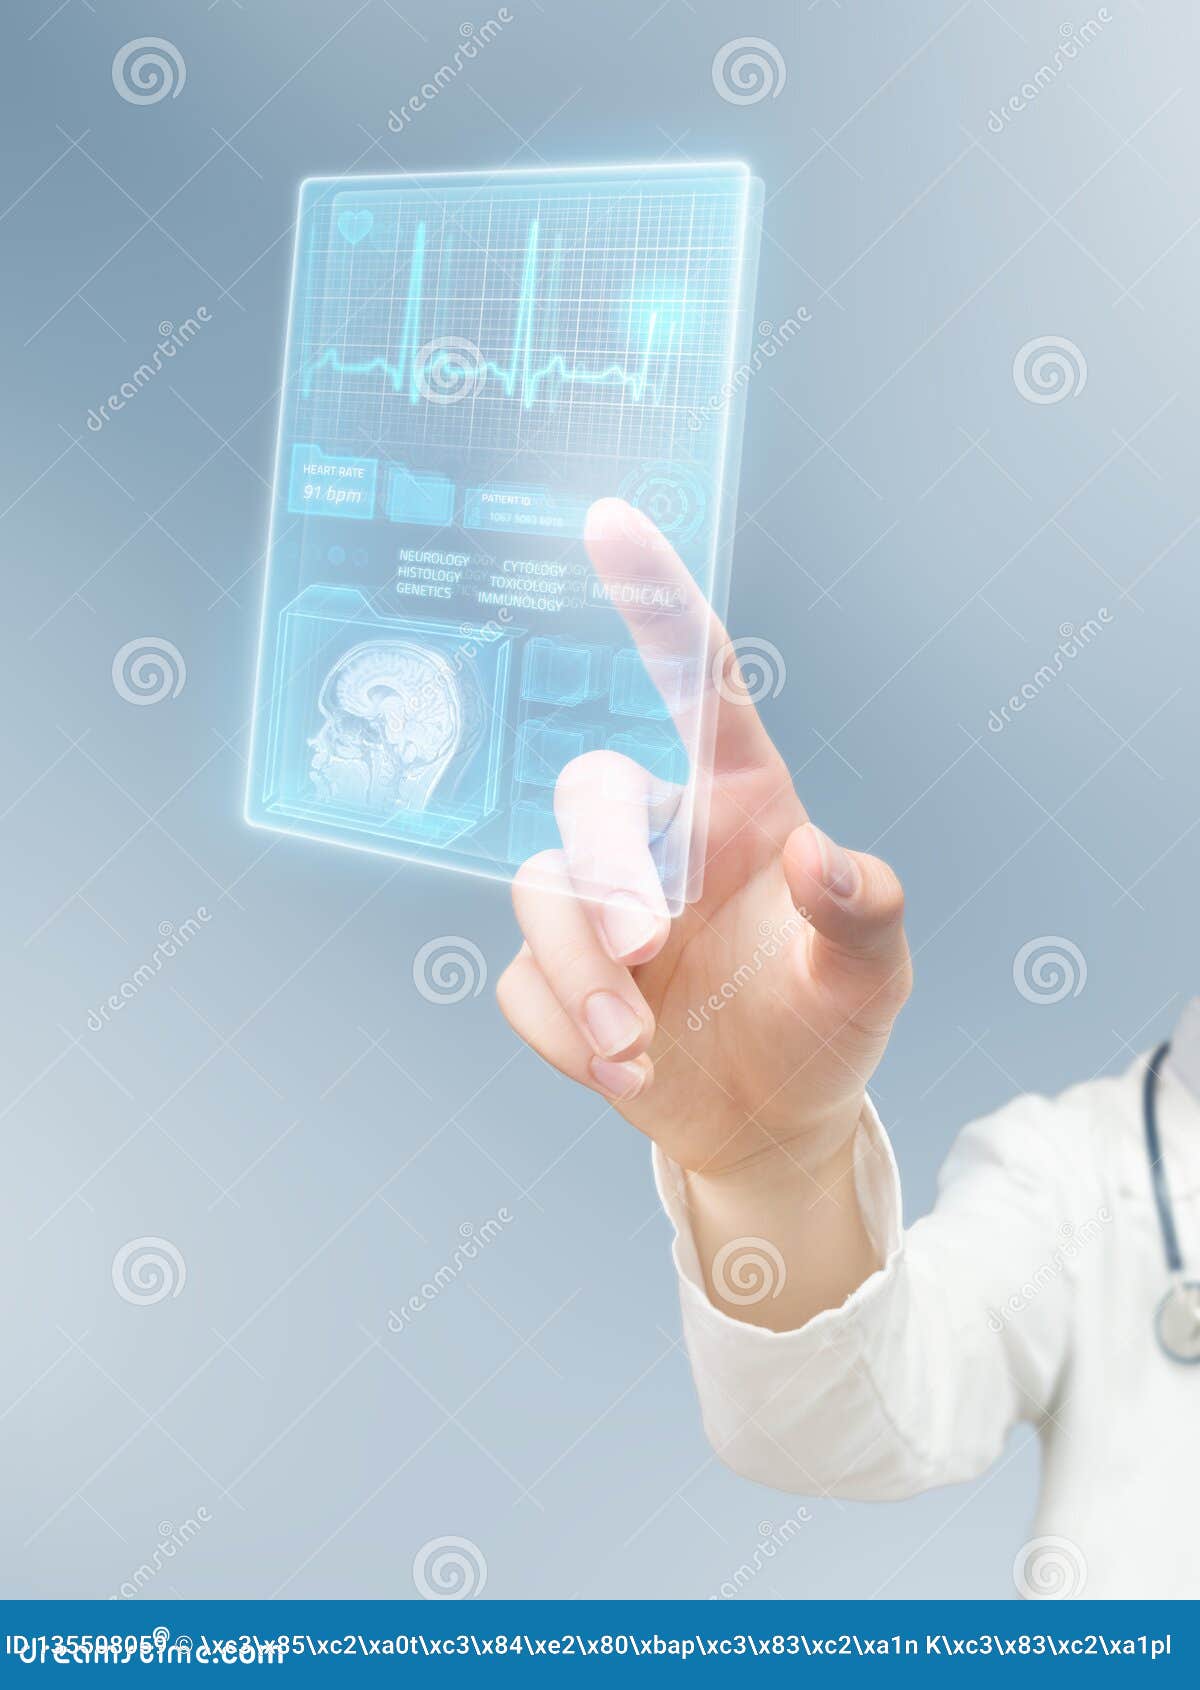 Modern healthcare stock image. Image of care, diagnostic - 135508059